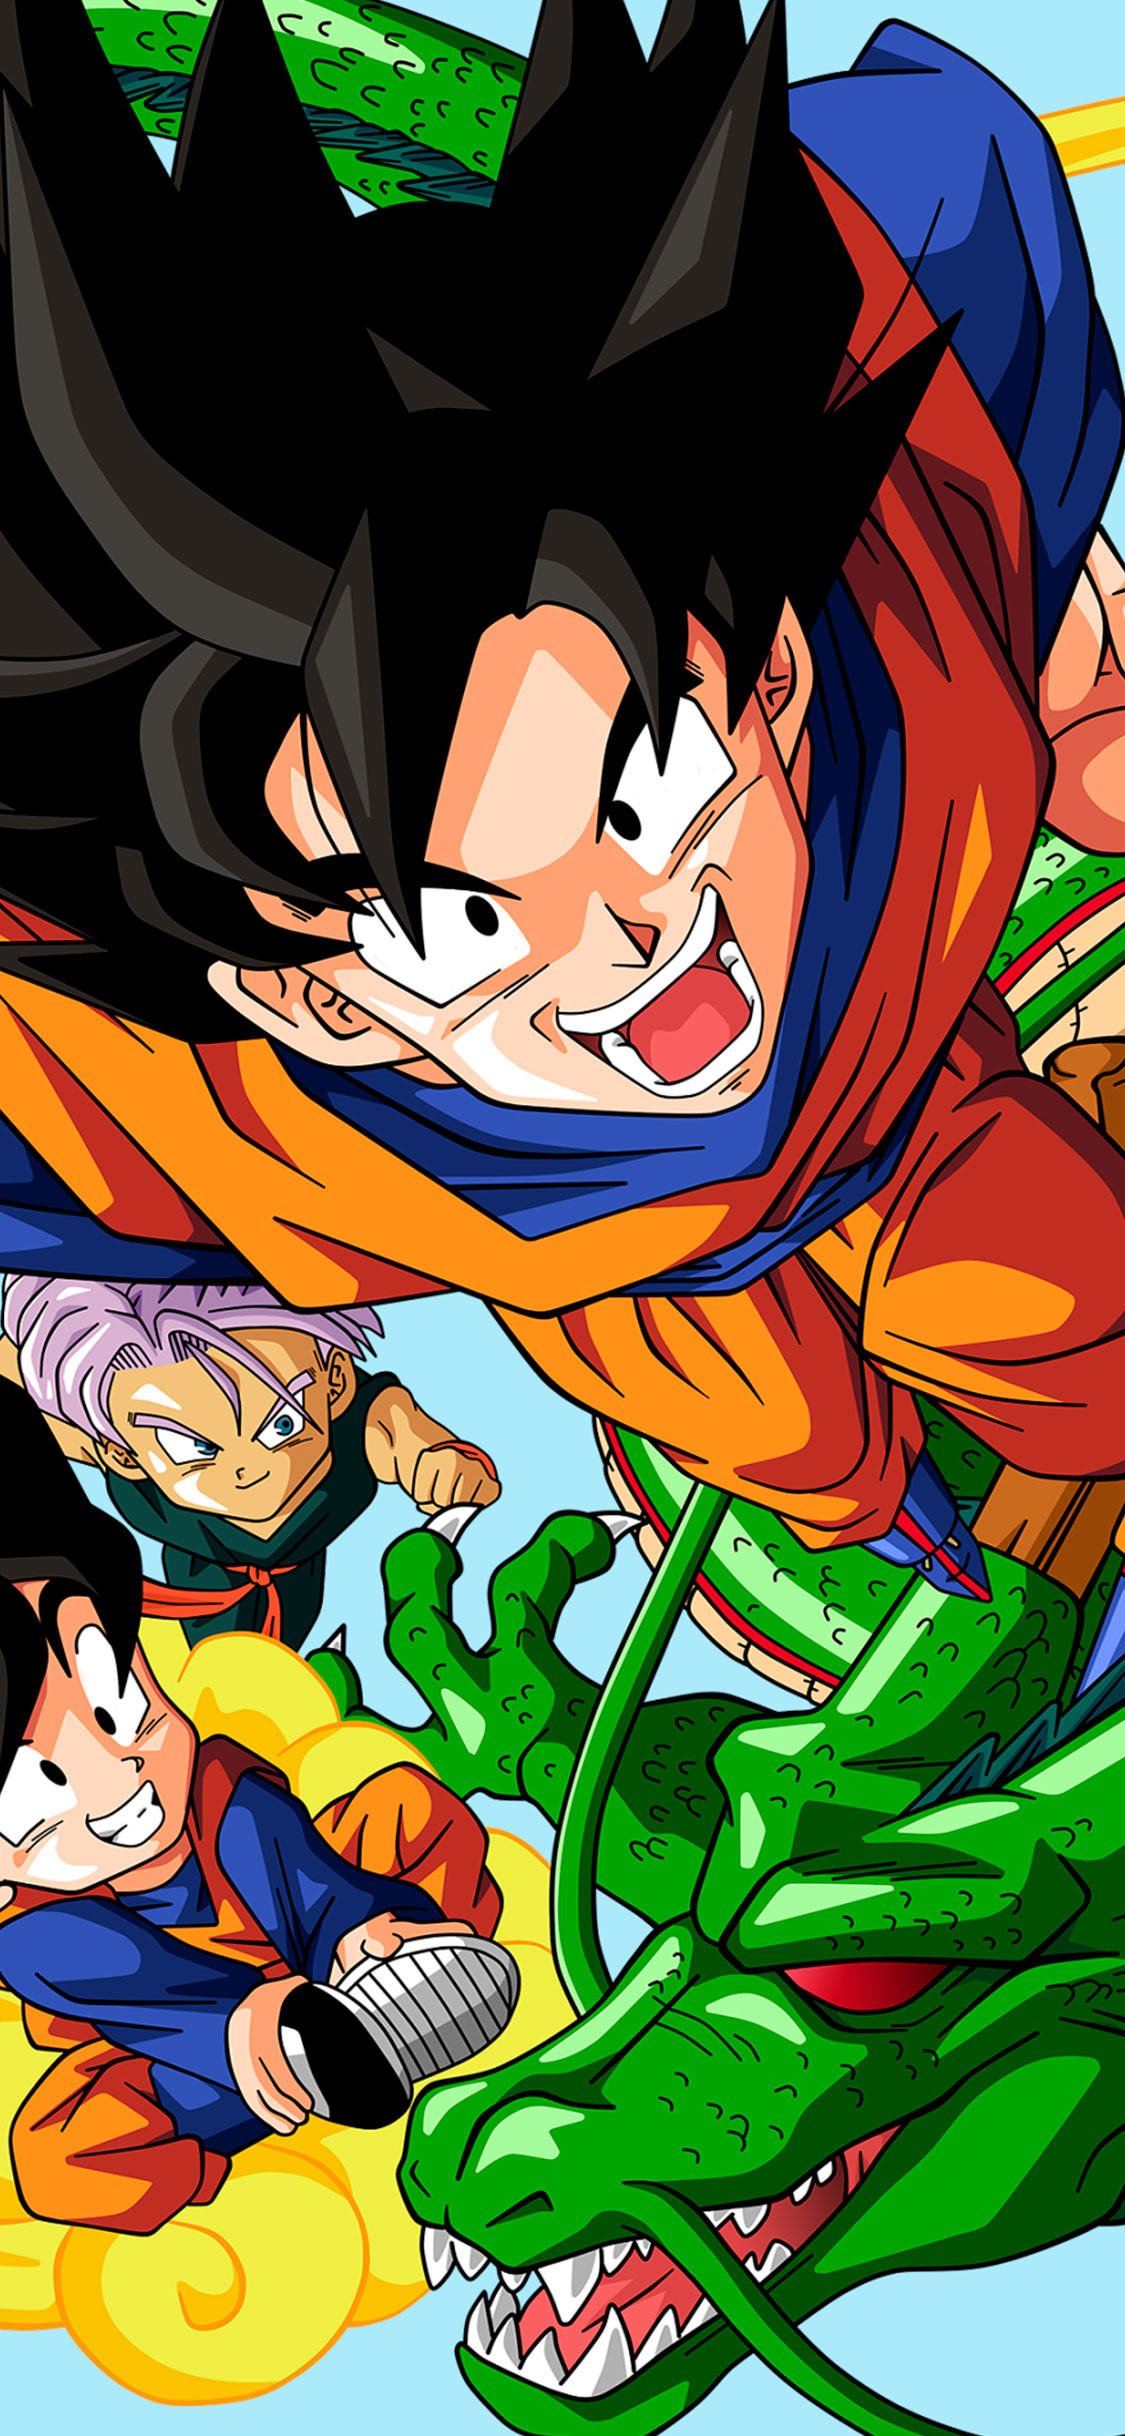 Dragon Ball Wallpaper for iPhone Pro Max, X, 6